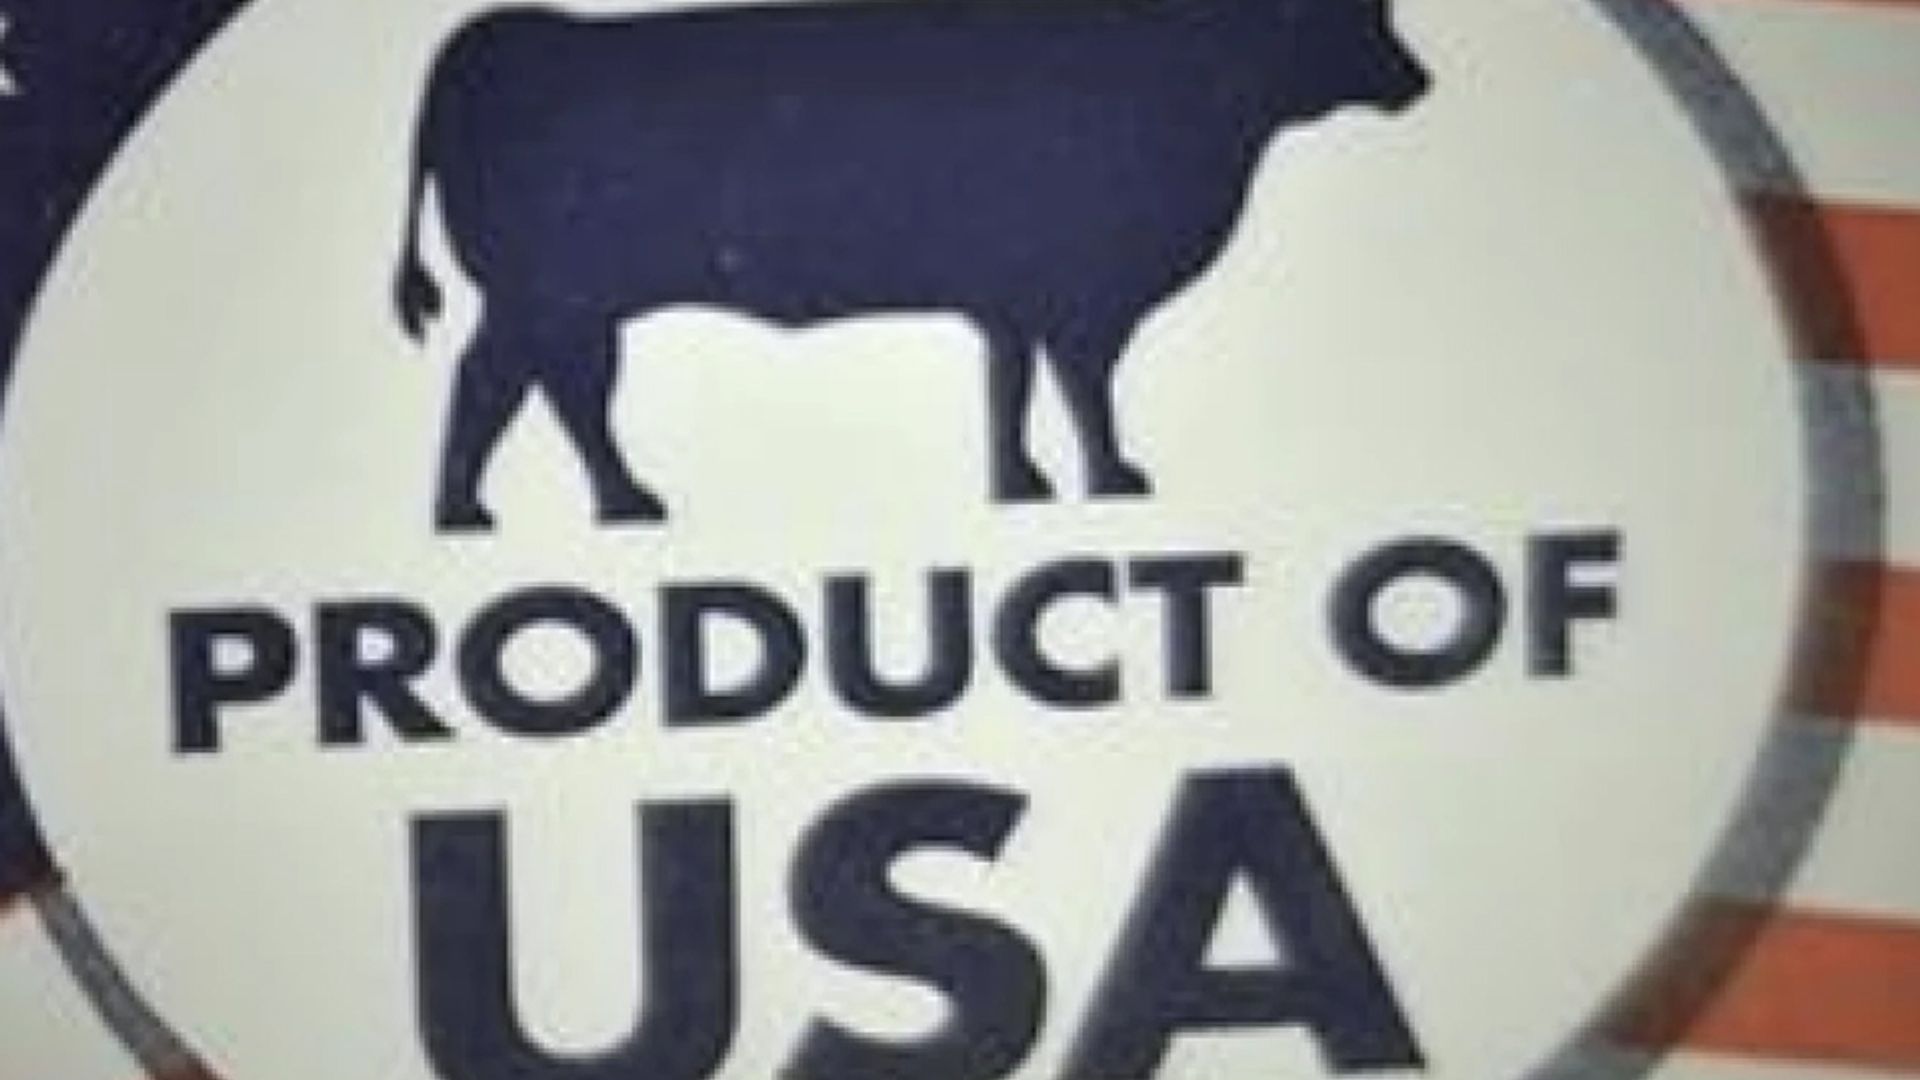 Aiming to assist consumers in purchasing American-made groceries, the U.S. Department of Agriculture introduced a new federal rule on Monday targeting meats, eggs, and poultry.